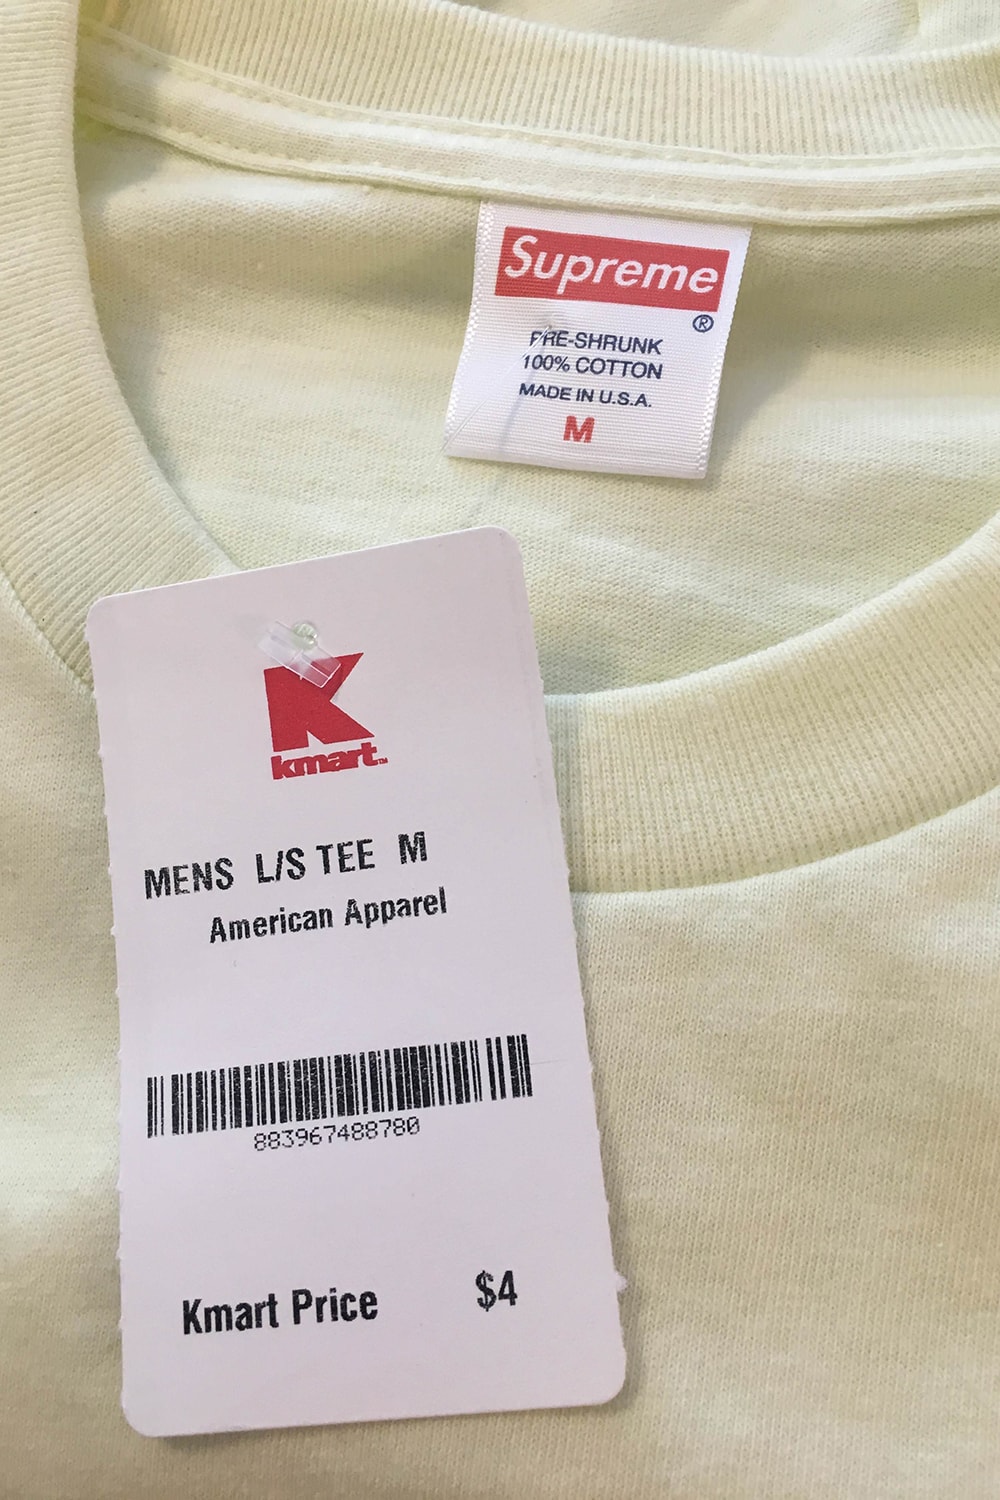 Supreme T-Shirts Found In K-Mart Selling For $4